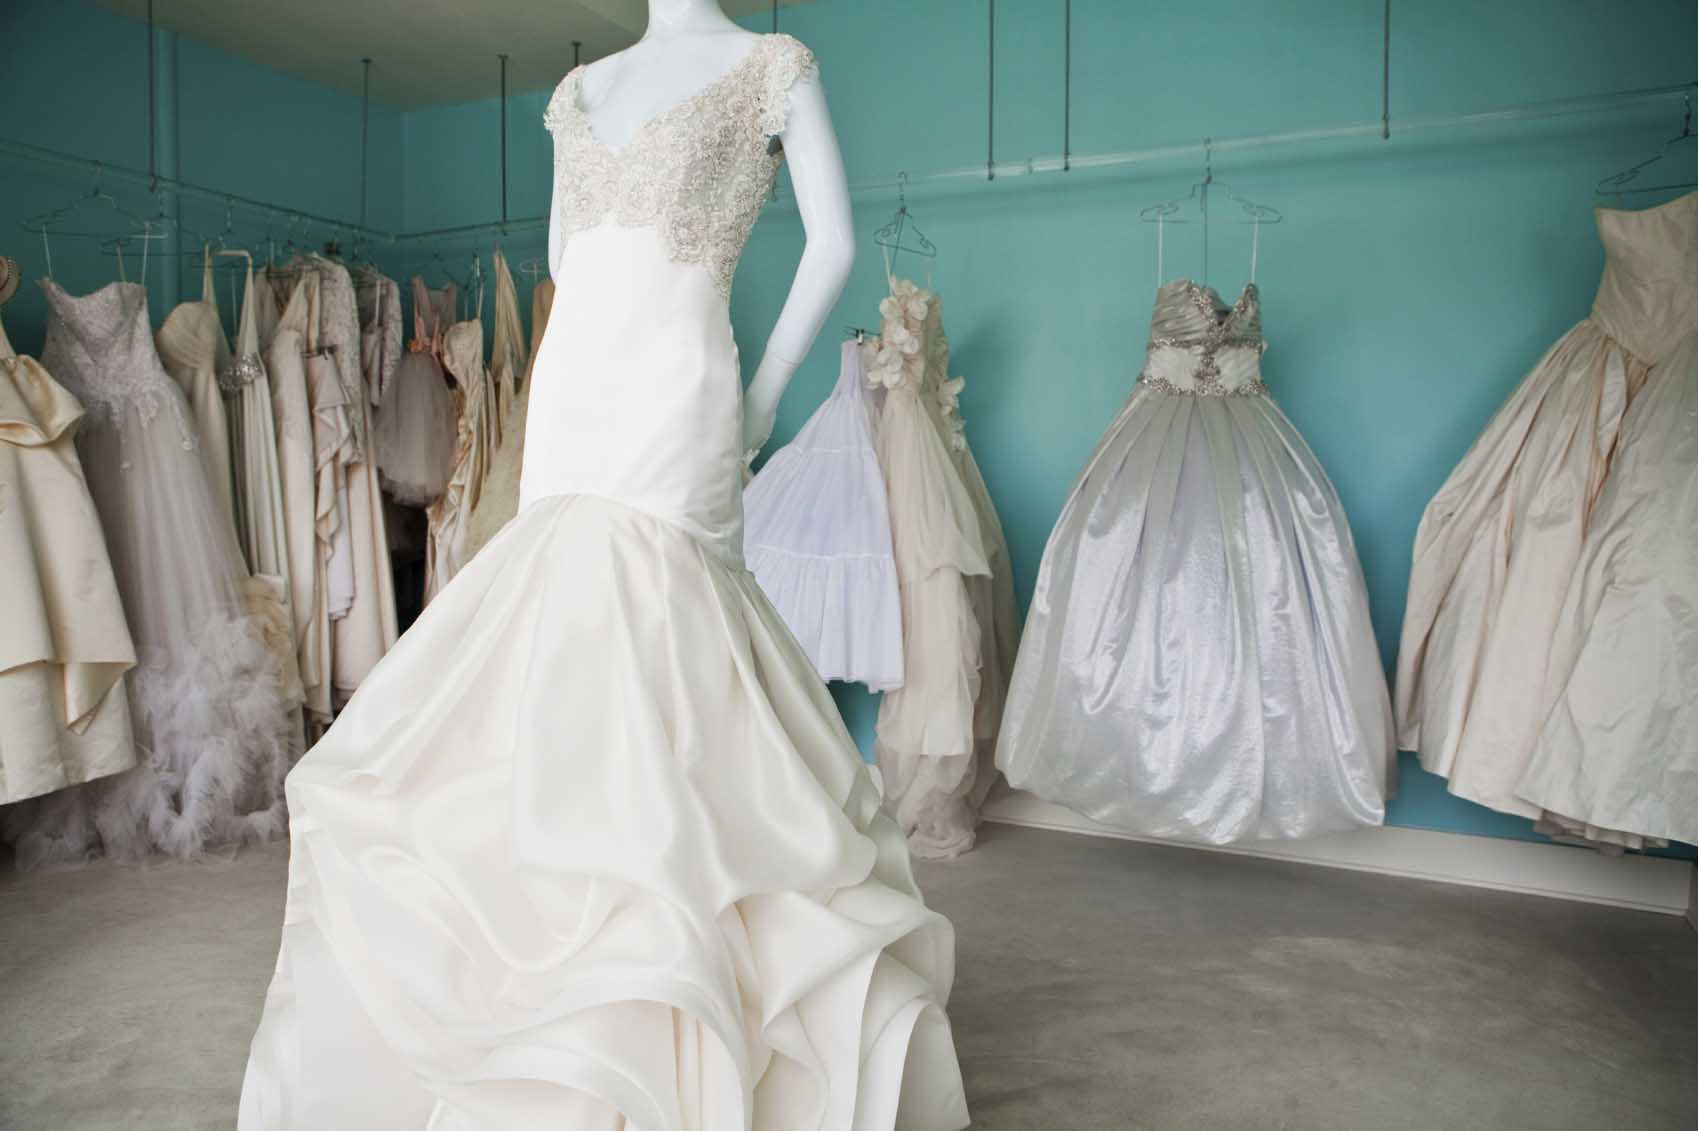 wedding dress shopping mistakes the most brides make